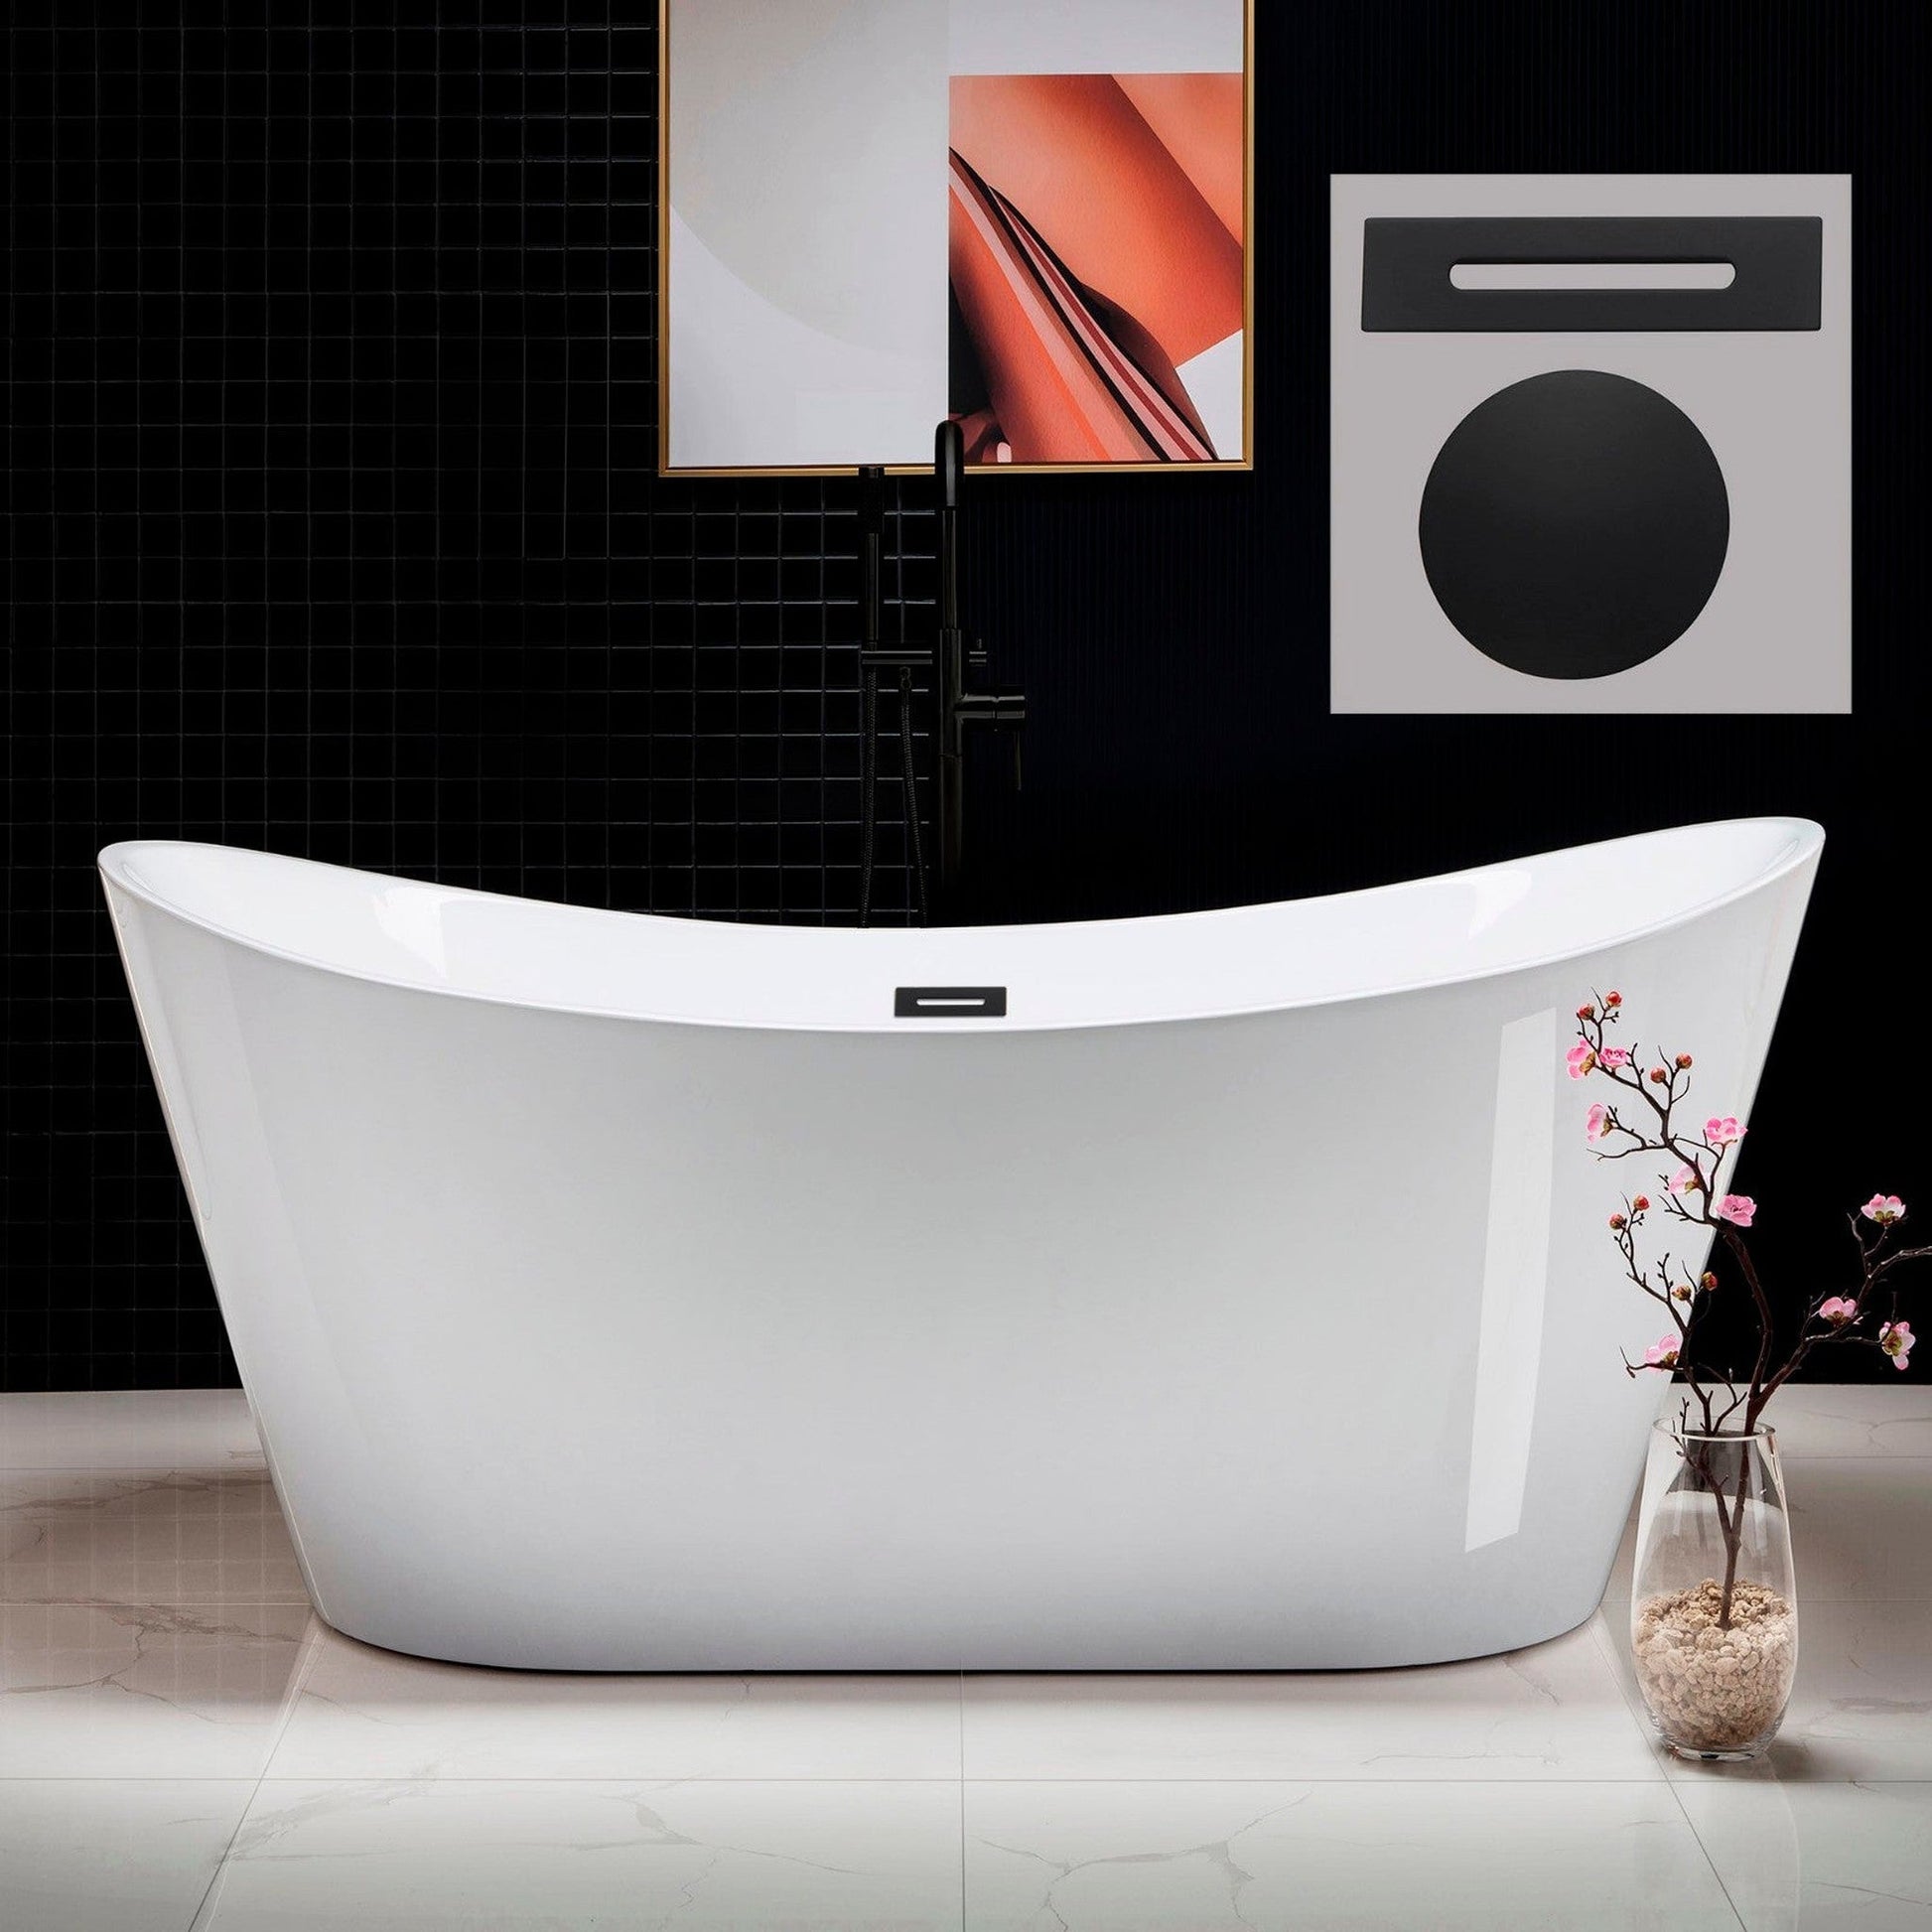 WoodBridge B0010 67" White Acrylic Freestanding Contemporary Soaking Bathtub With Matte Black Drain, Overflow, F0072MBSQ Tub Filler and Caddy Tray